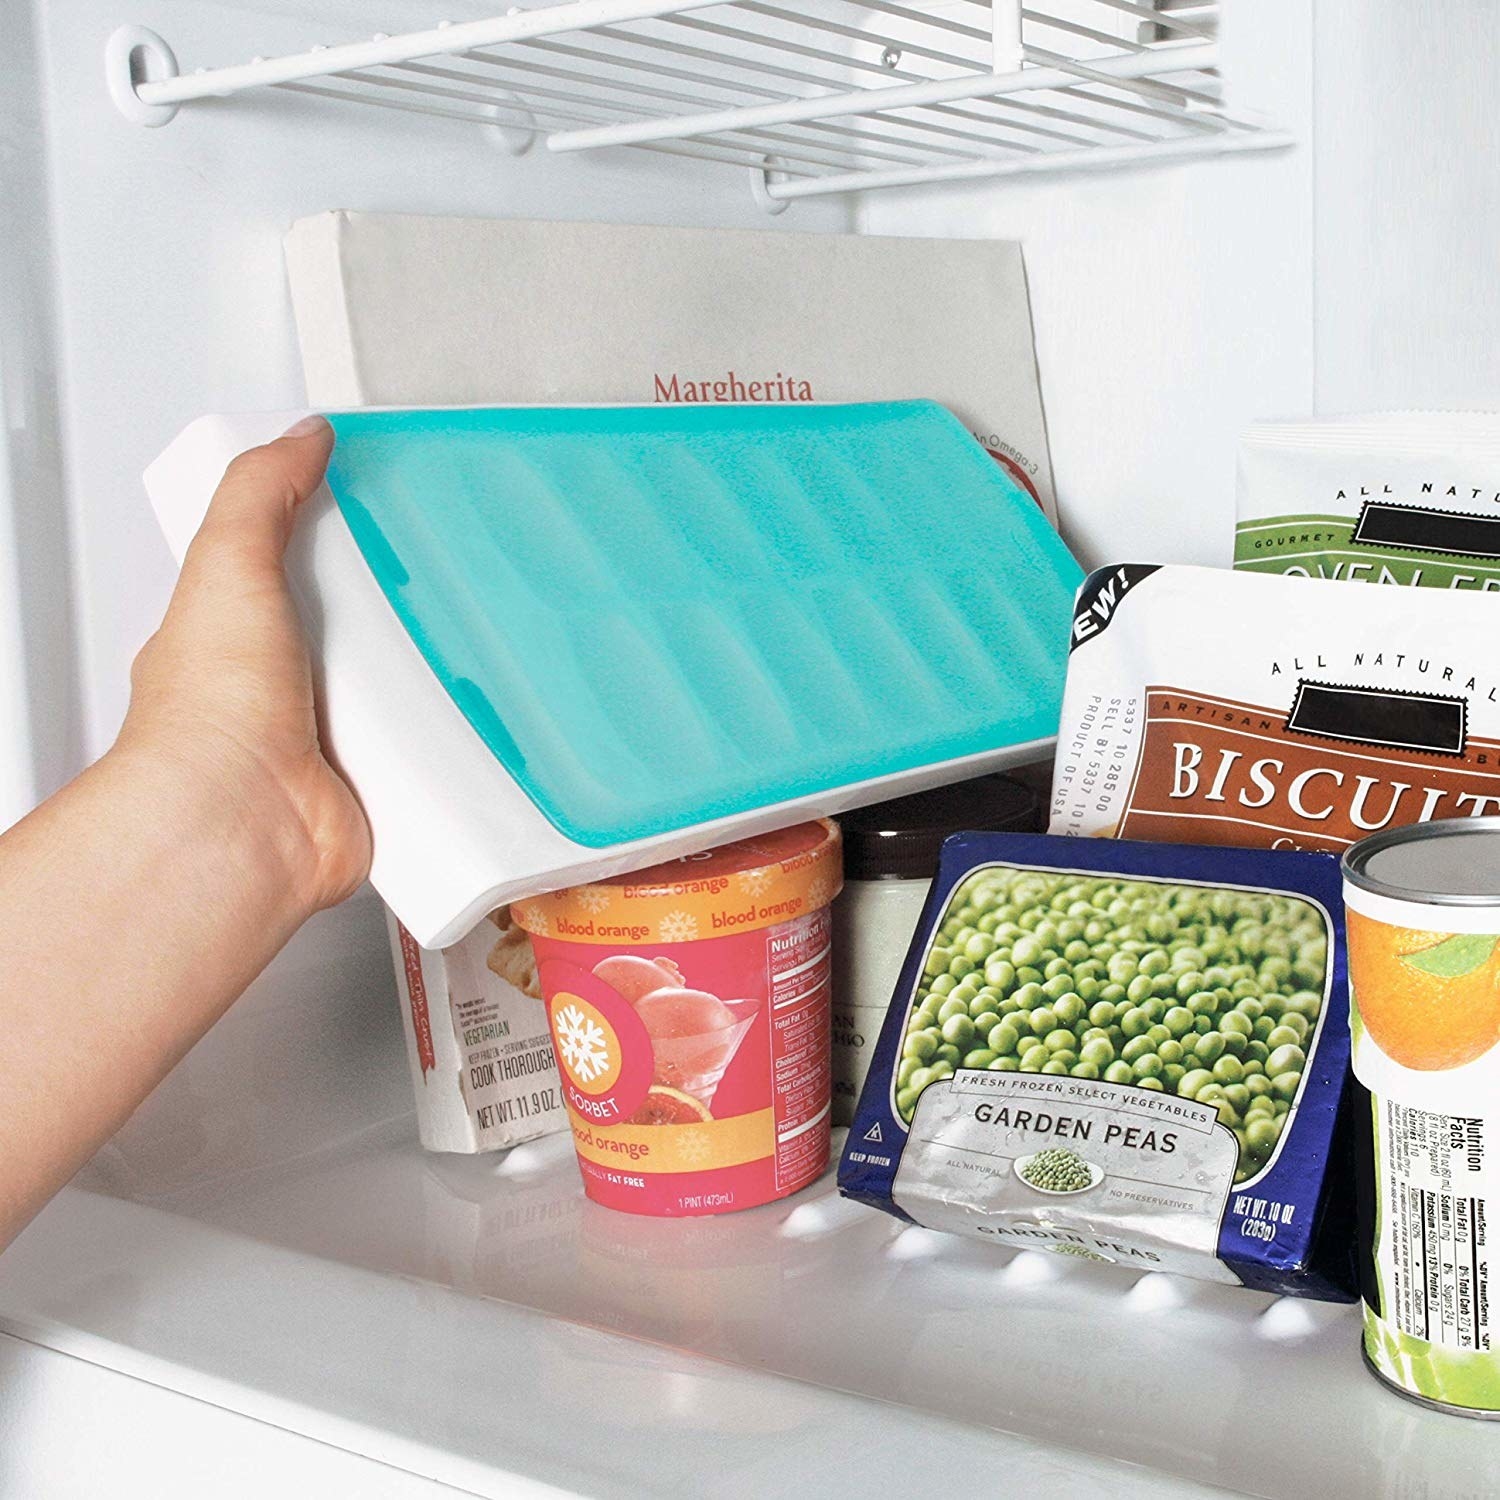 11 Kitchen Appliances that Would Make your Life Easier - Food Corner